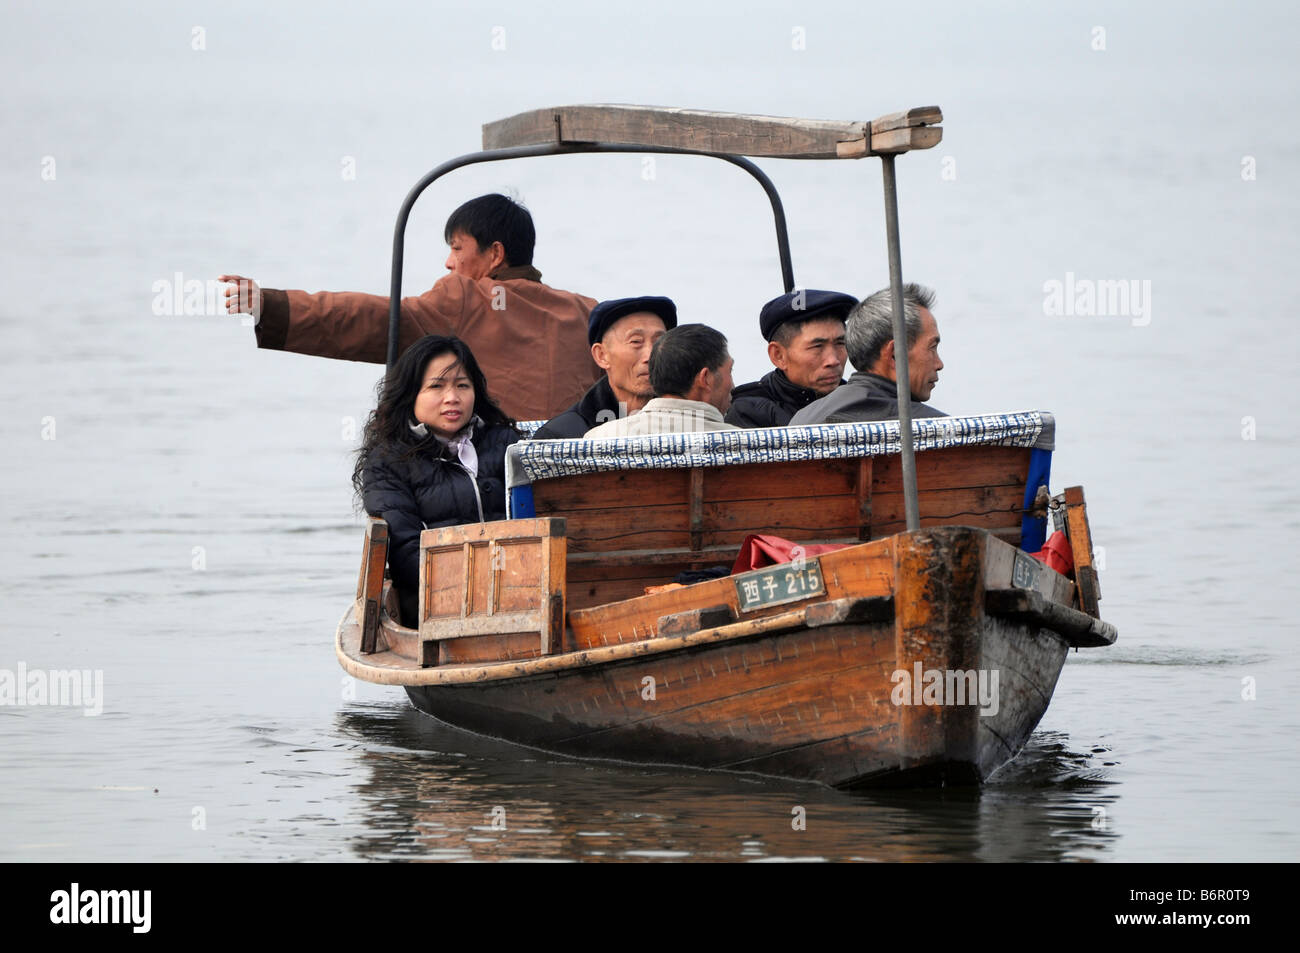 Chinese tourists ride on a boat in Hangzhou's famous West Lake in winter, China. Stock Photo